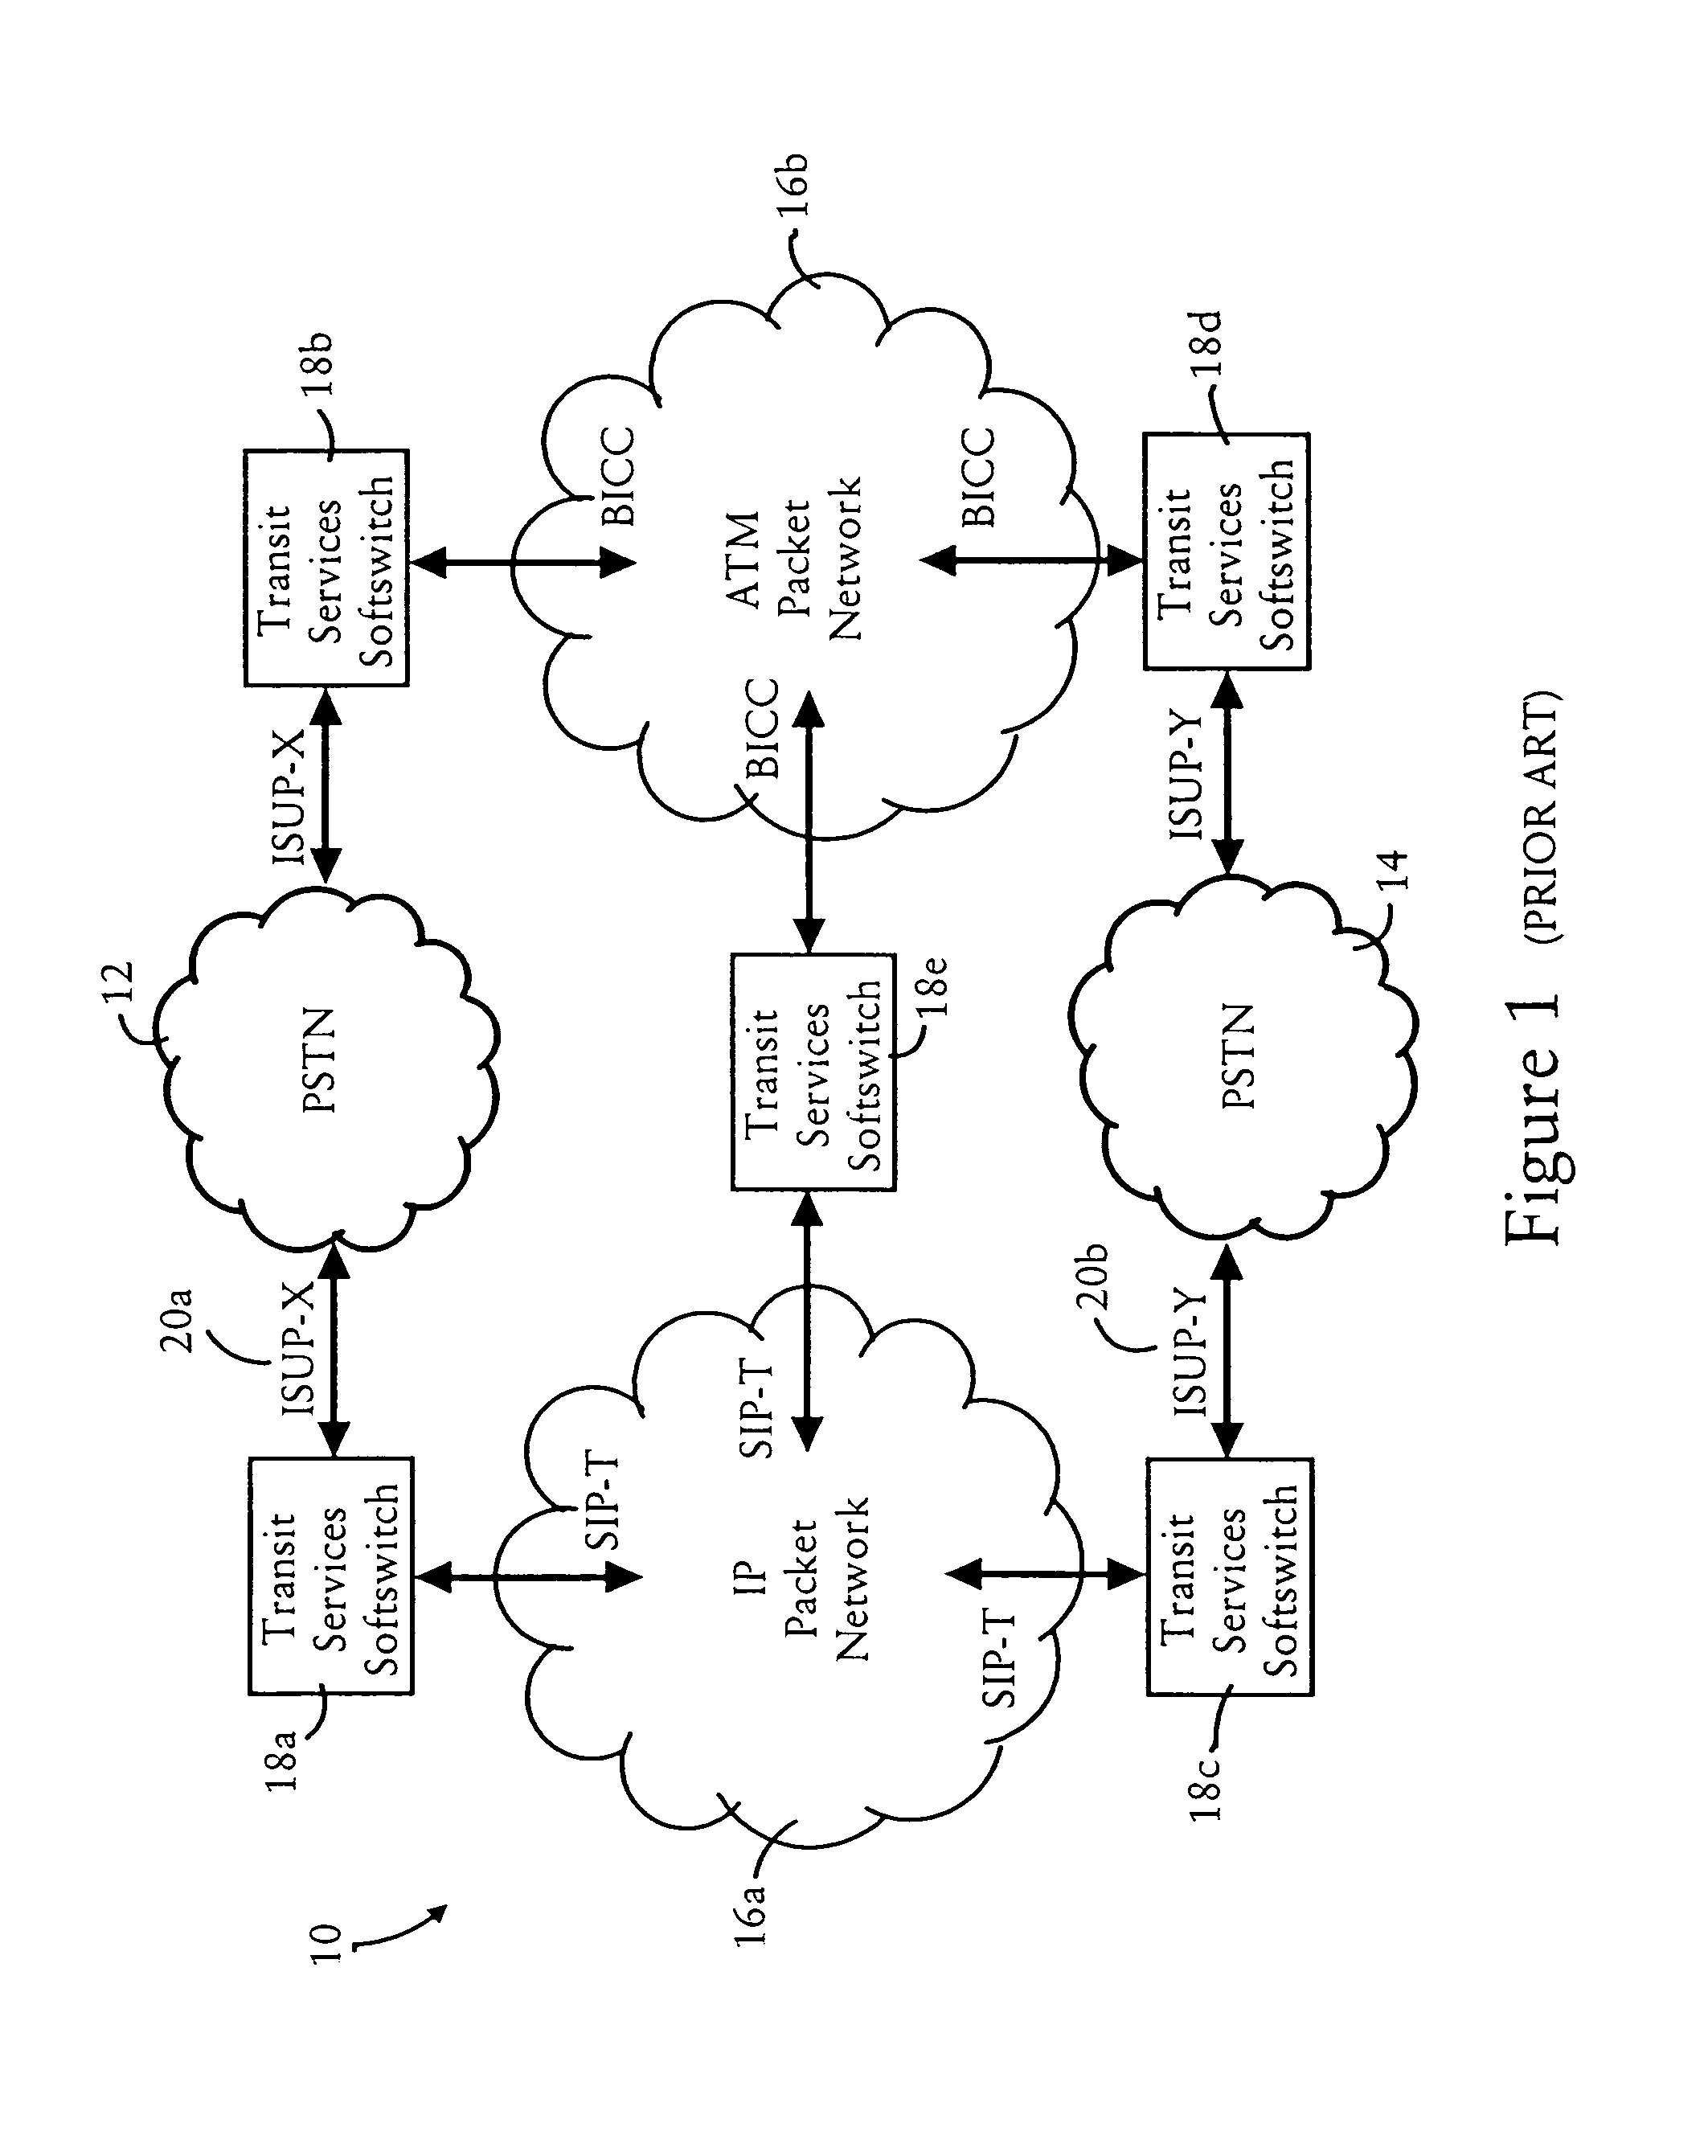 Arrangement for protocol independent transfer of control parameters across internetworks using generic transparency descriptor objects